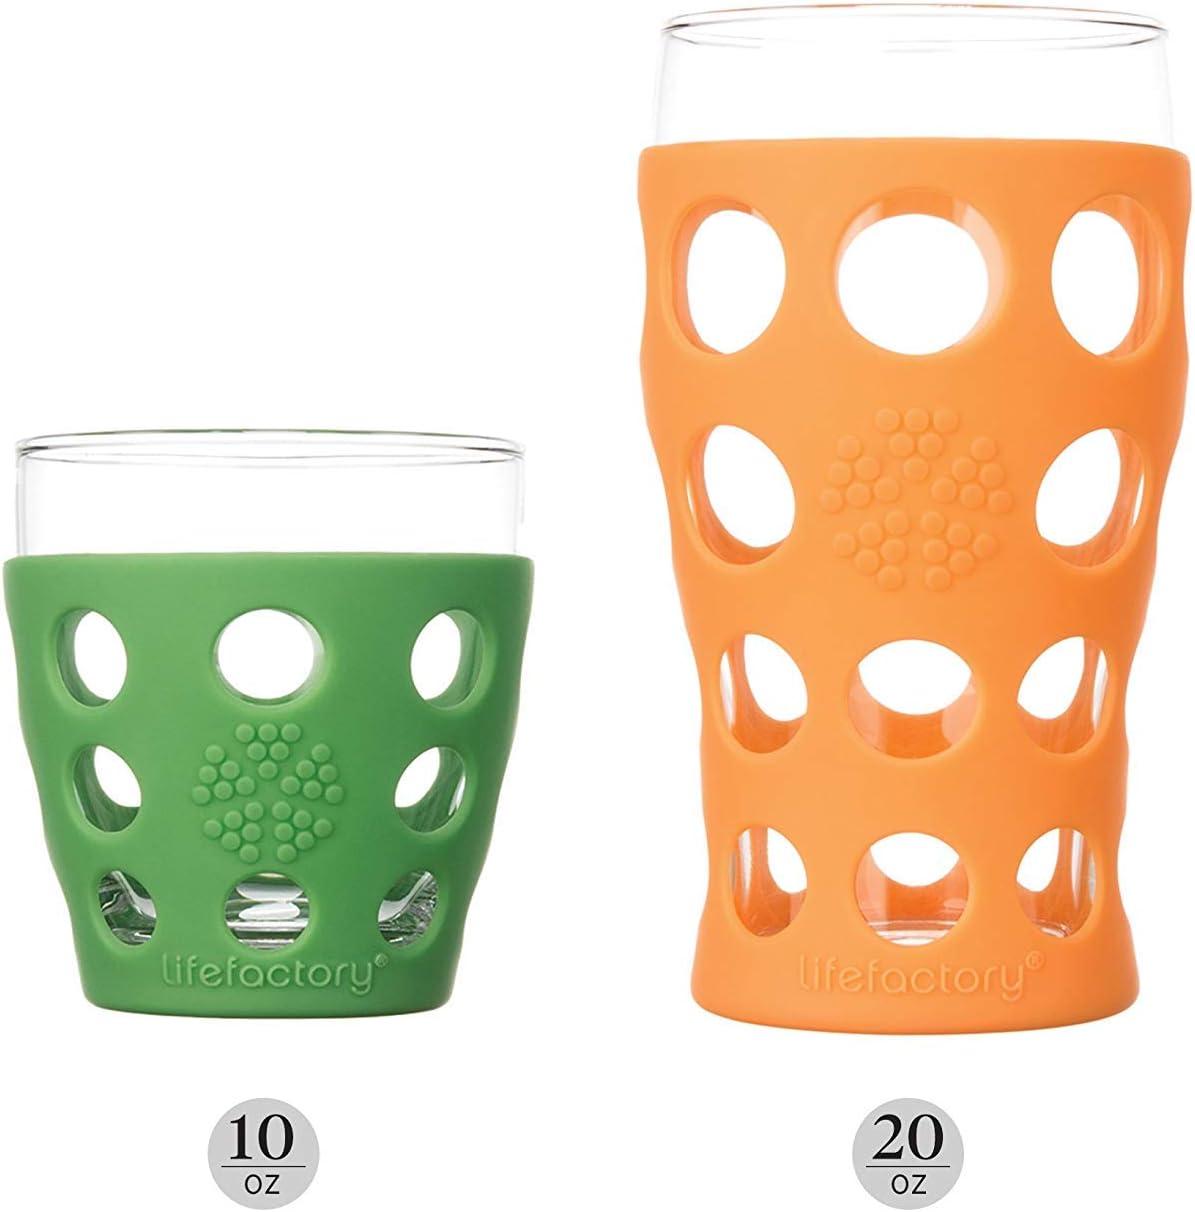 Lifefactory 20oz Beverage Glass with Silicone Sleeve -4 Pack